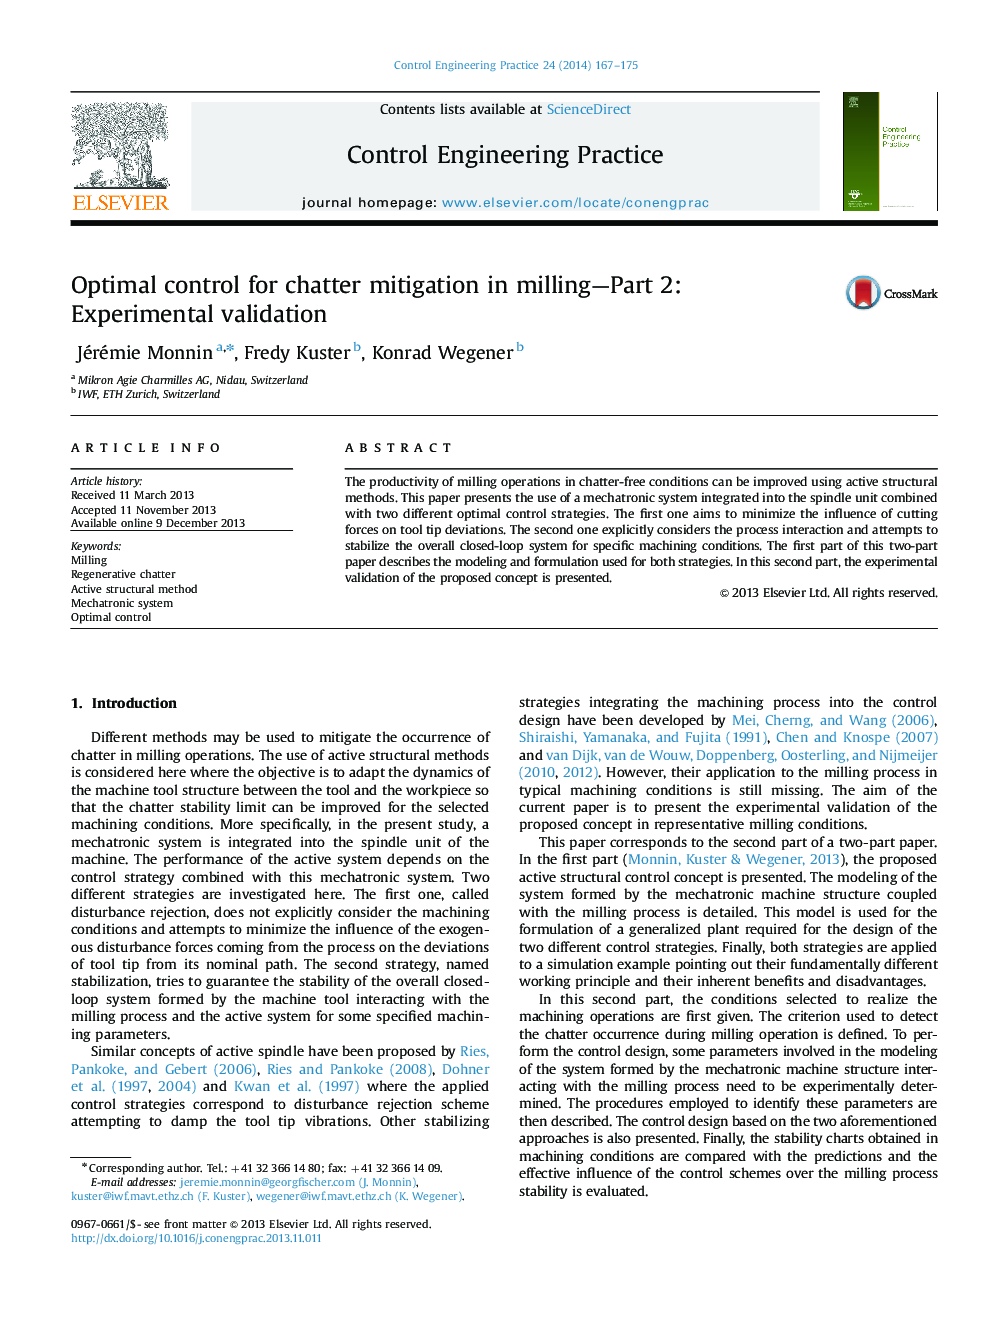 Optimal control for chatter mitigation in milling—Part 2: Experimental validation